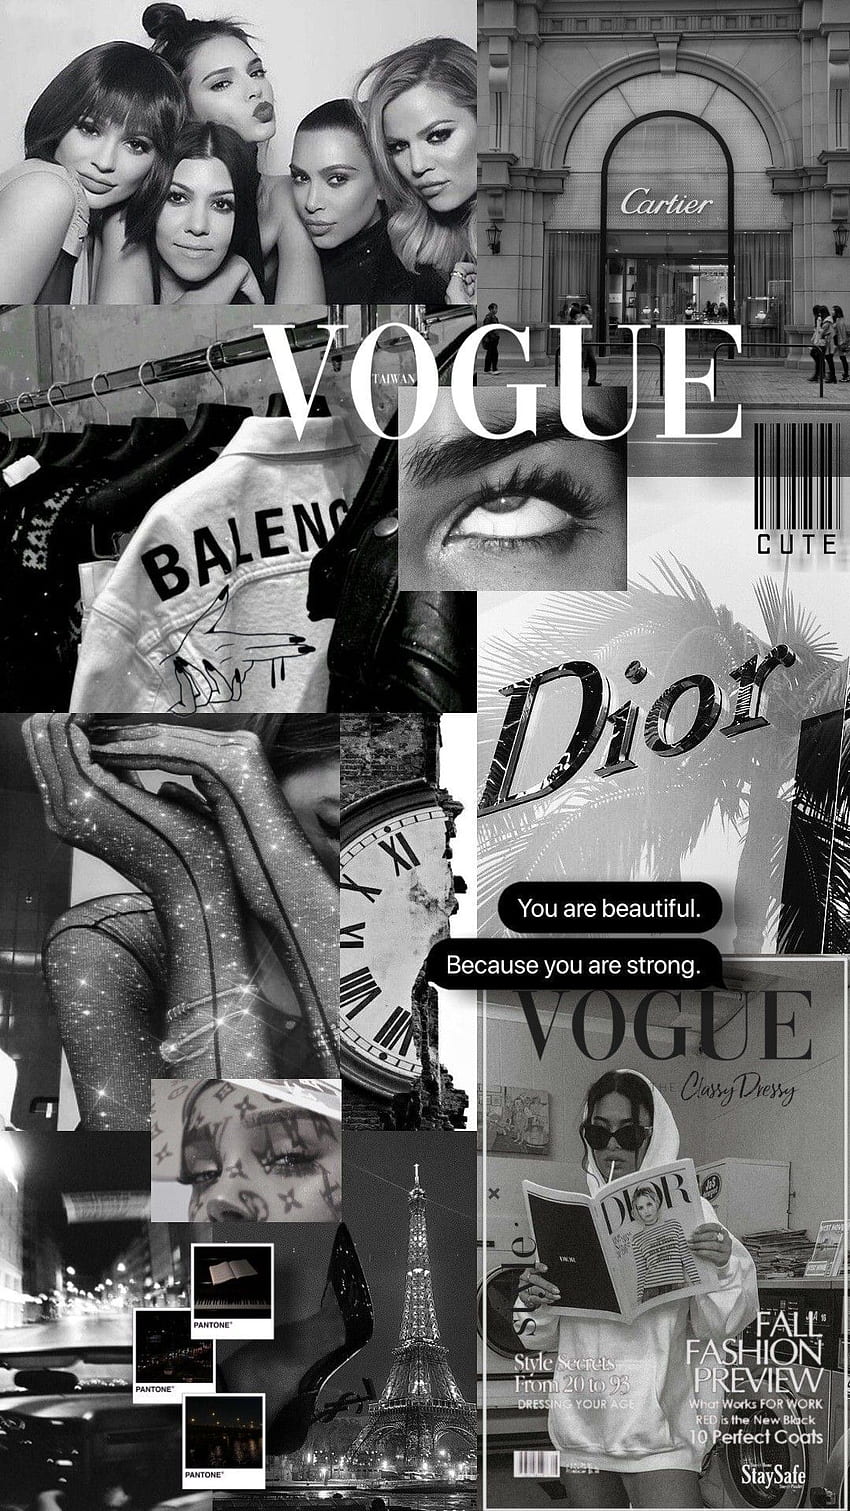 A collage of pictures with the word vogue on it - Fashion, Dior, Vogue